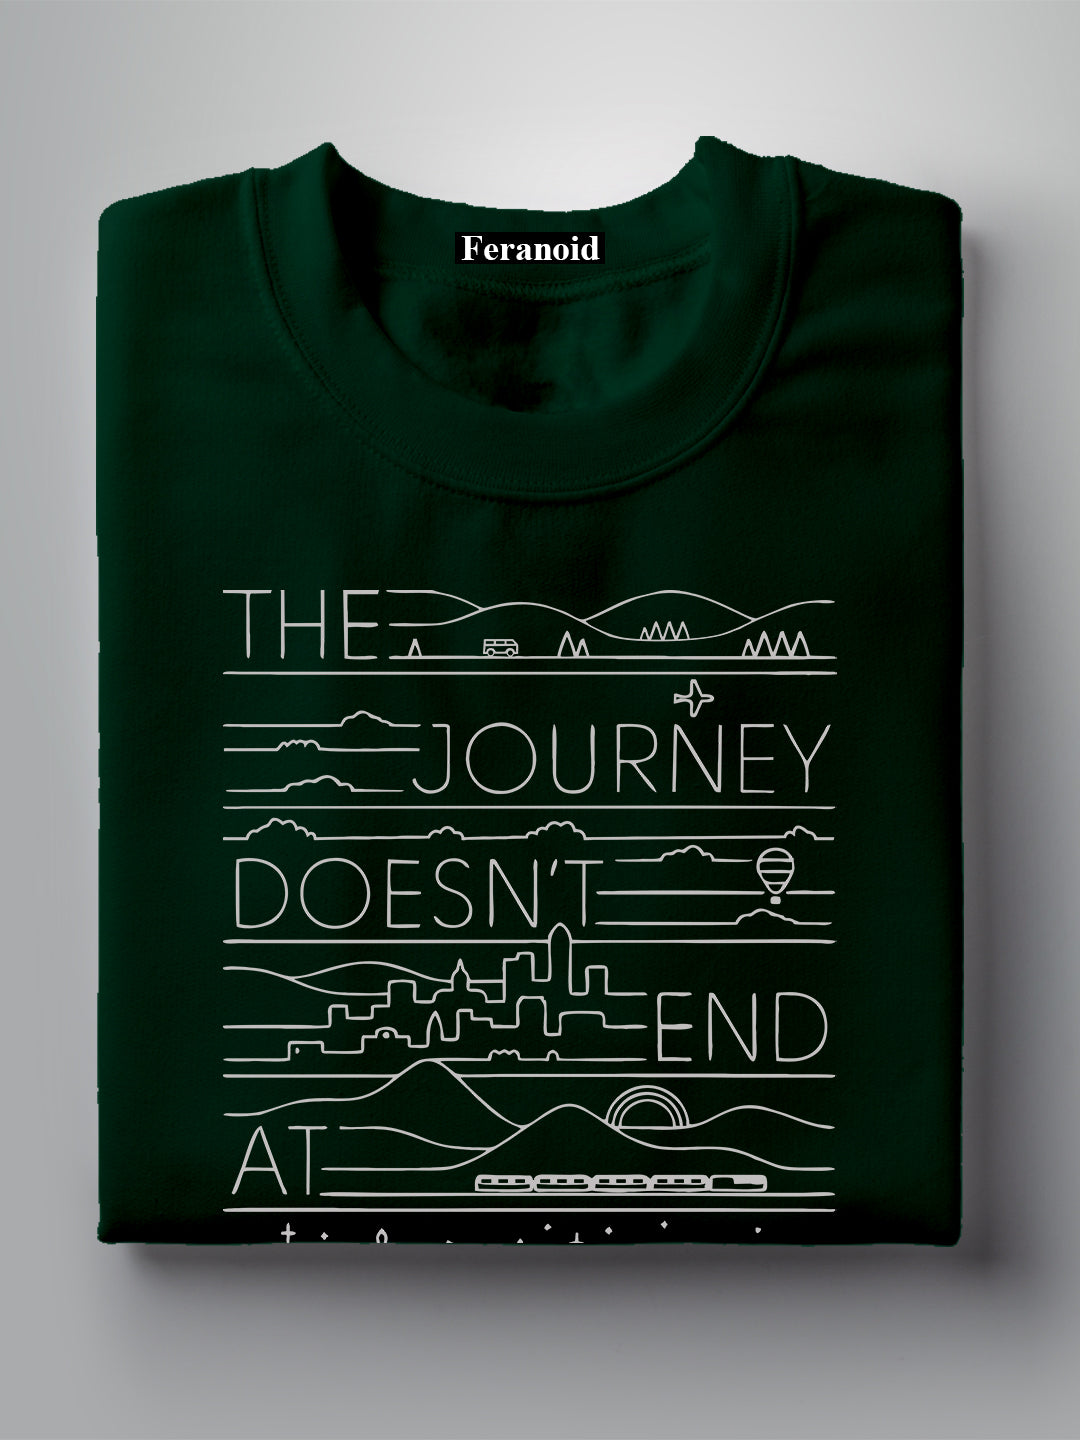 THE JOURNEY GREEN T-SHIRT